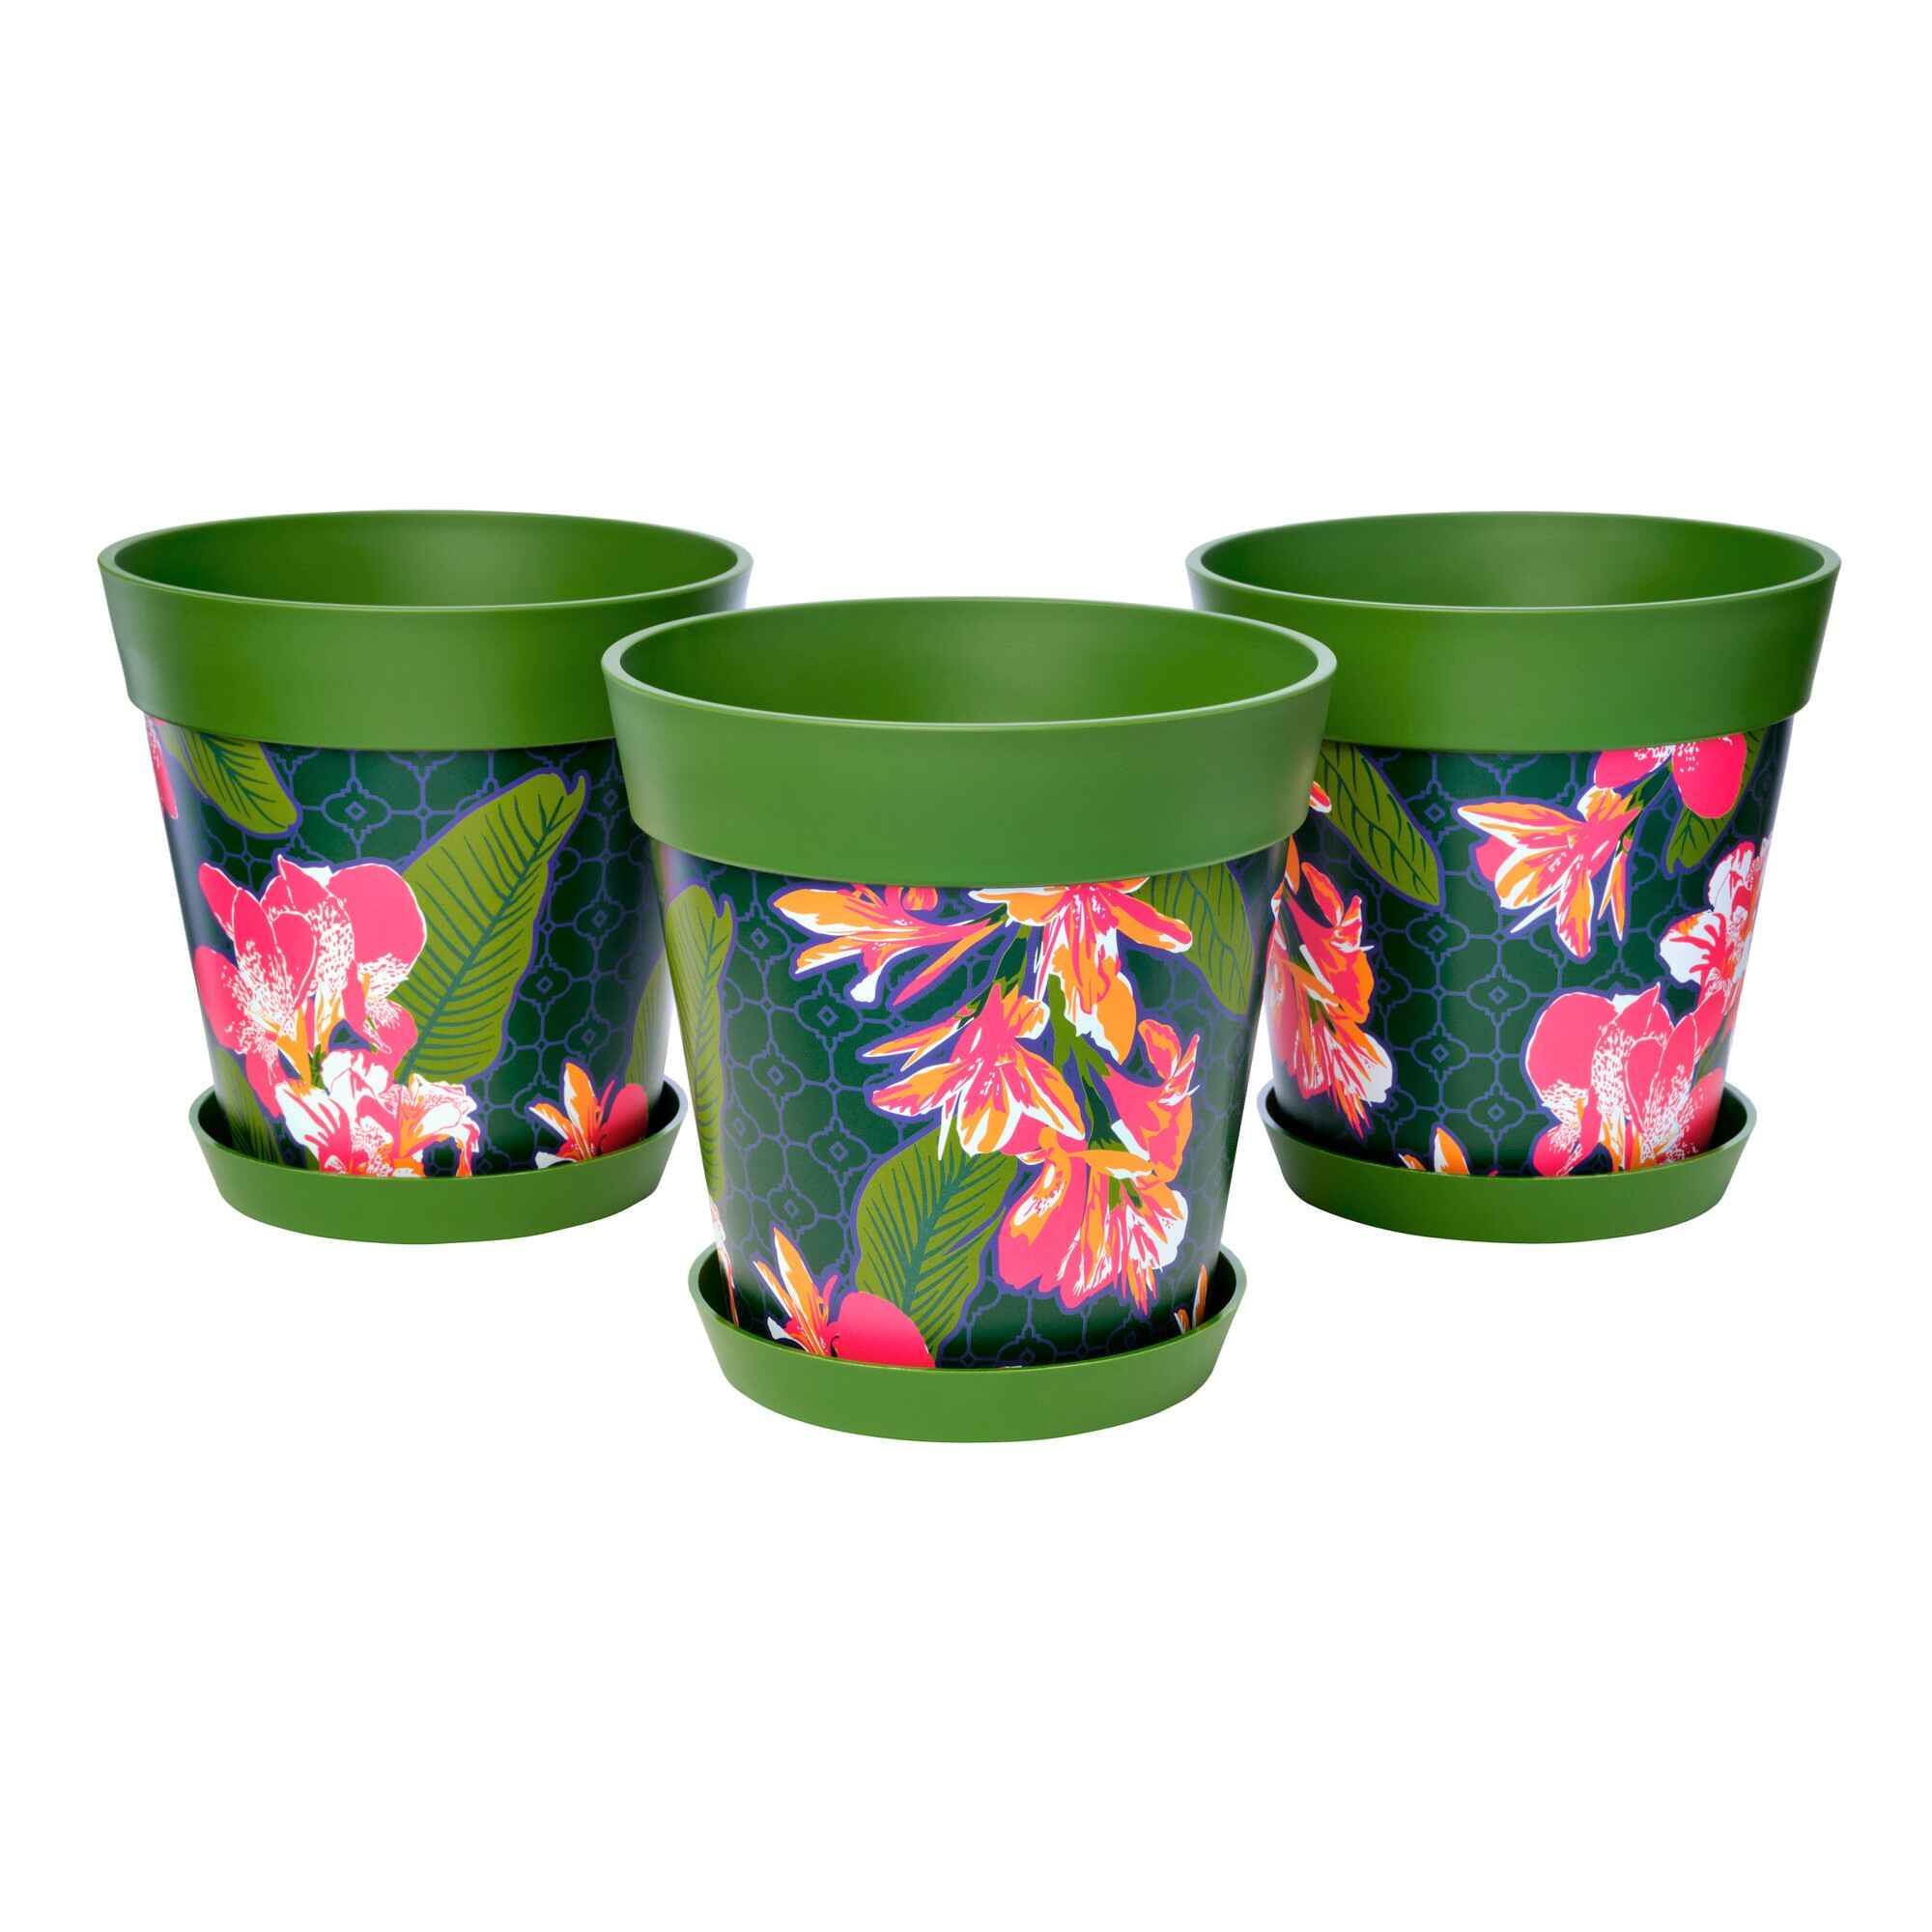 Picture of 3 Medium 22cm Green Tropical and Floral Pattern Indoor/Outdoor Flower Pot and Saucers 